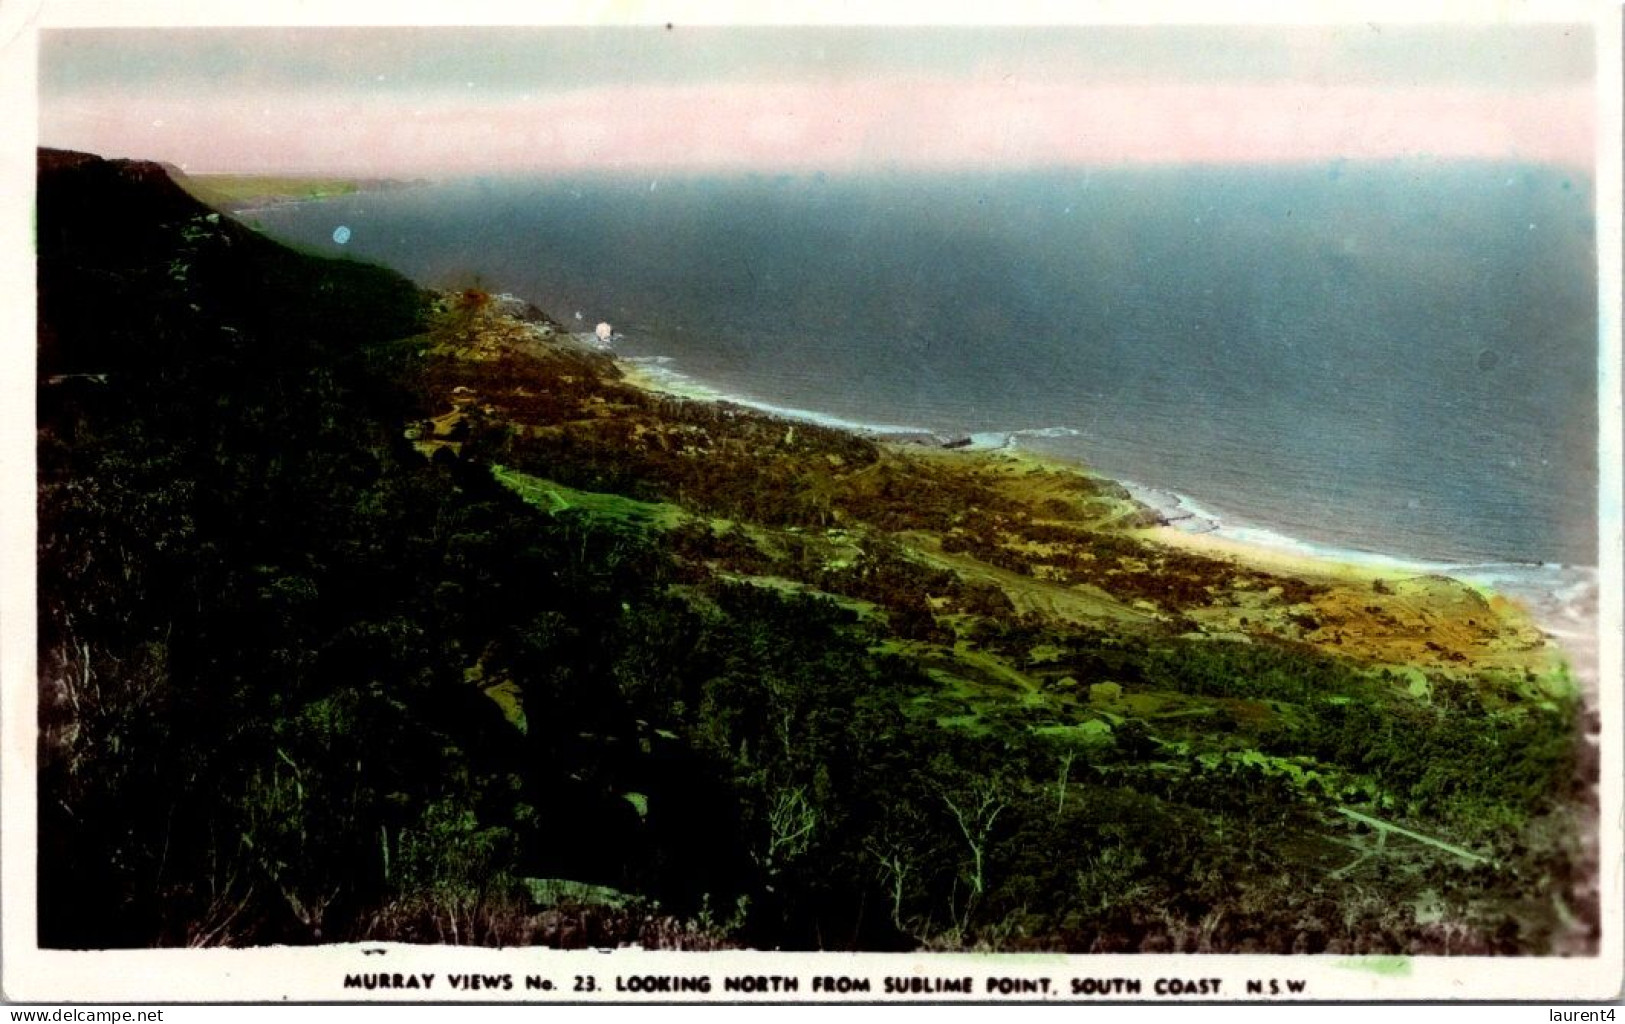 17-9-2023 (1 U 25) Australia - Very Old - Looking North For Sublime Point - South Coast (near Wollongong) - Wollongong